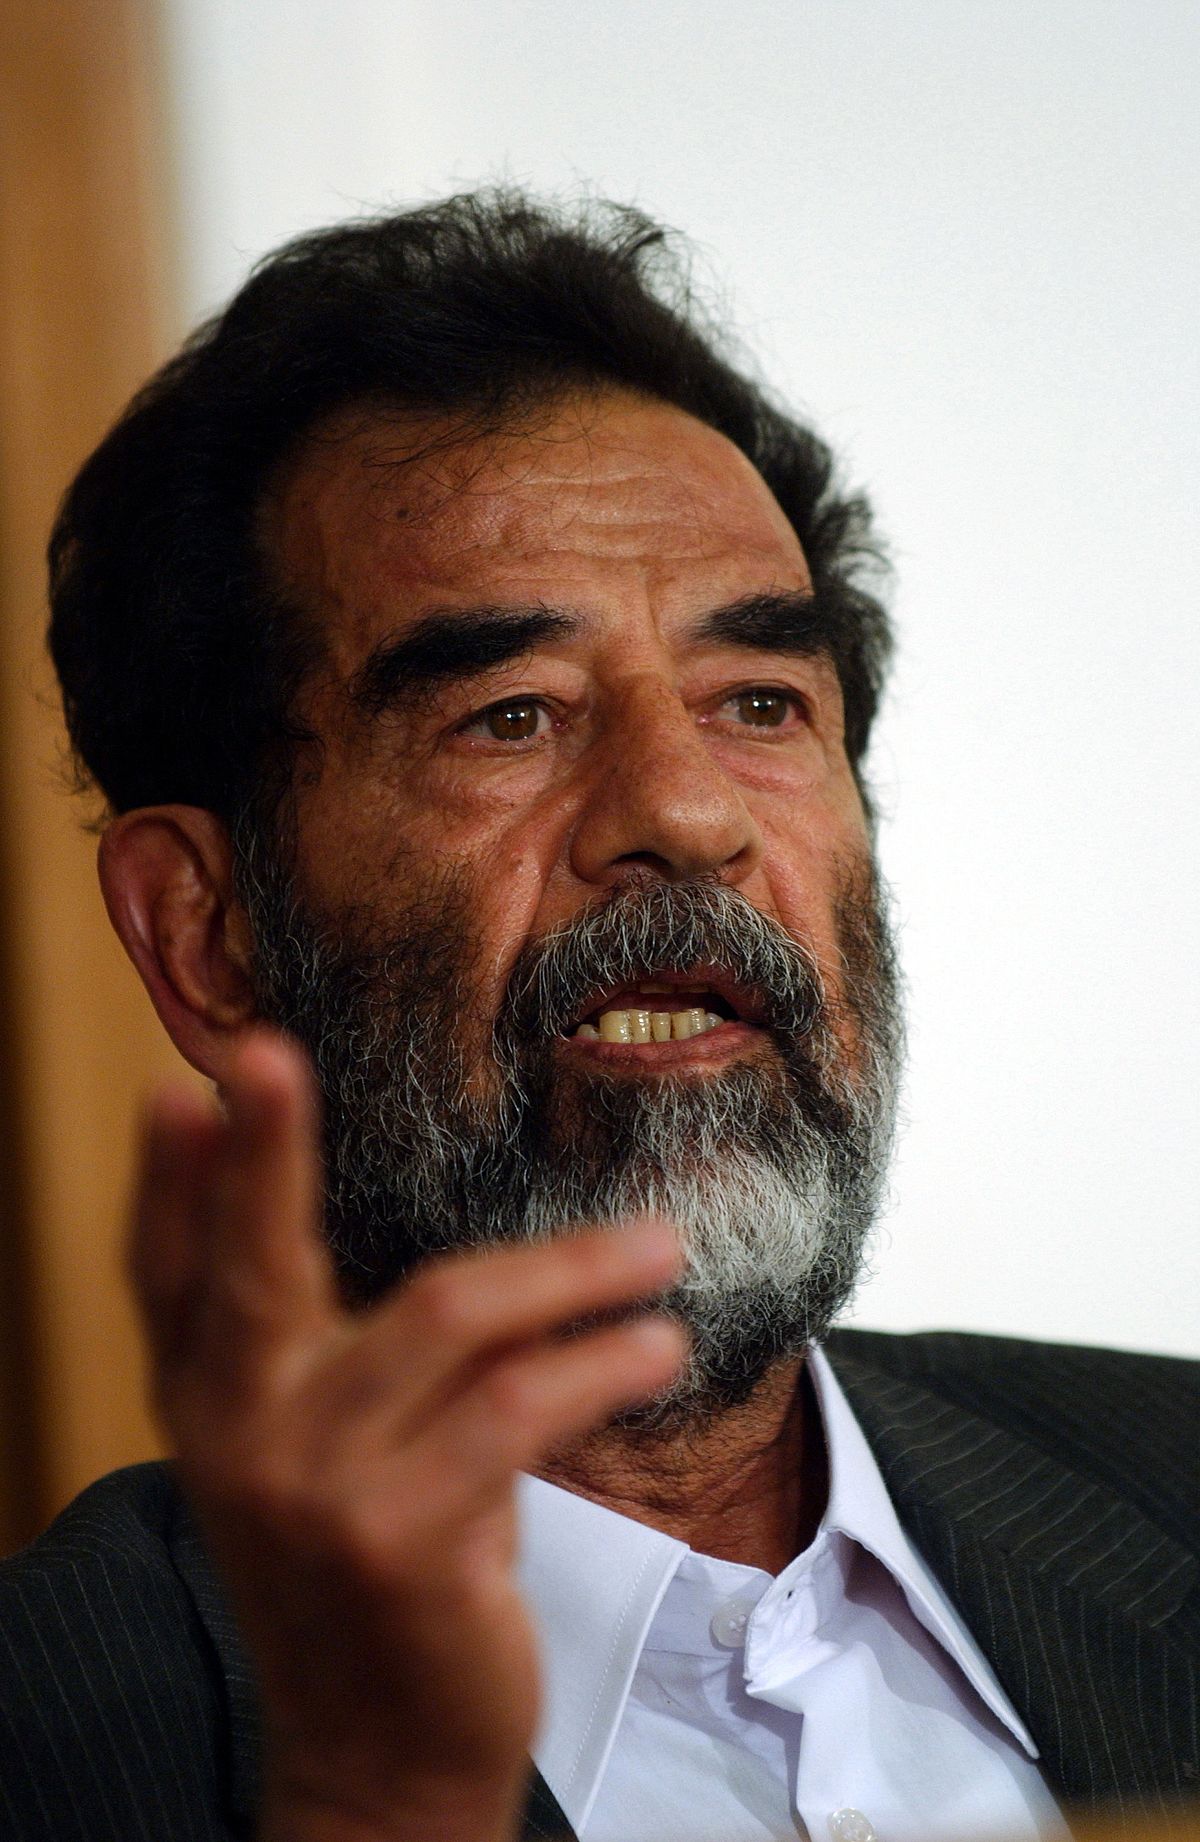 1200px-Saddam_Hussein_at_trial,_July_2004